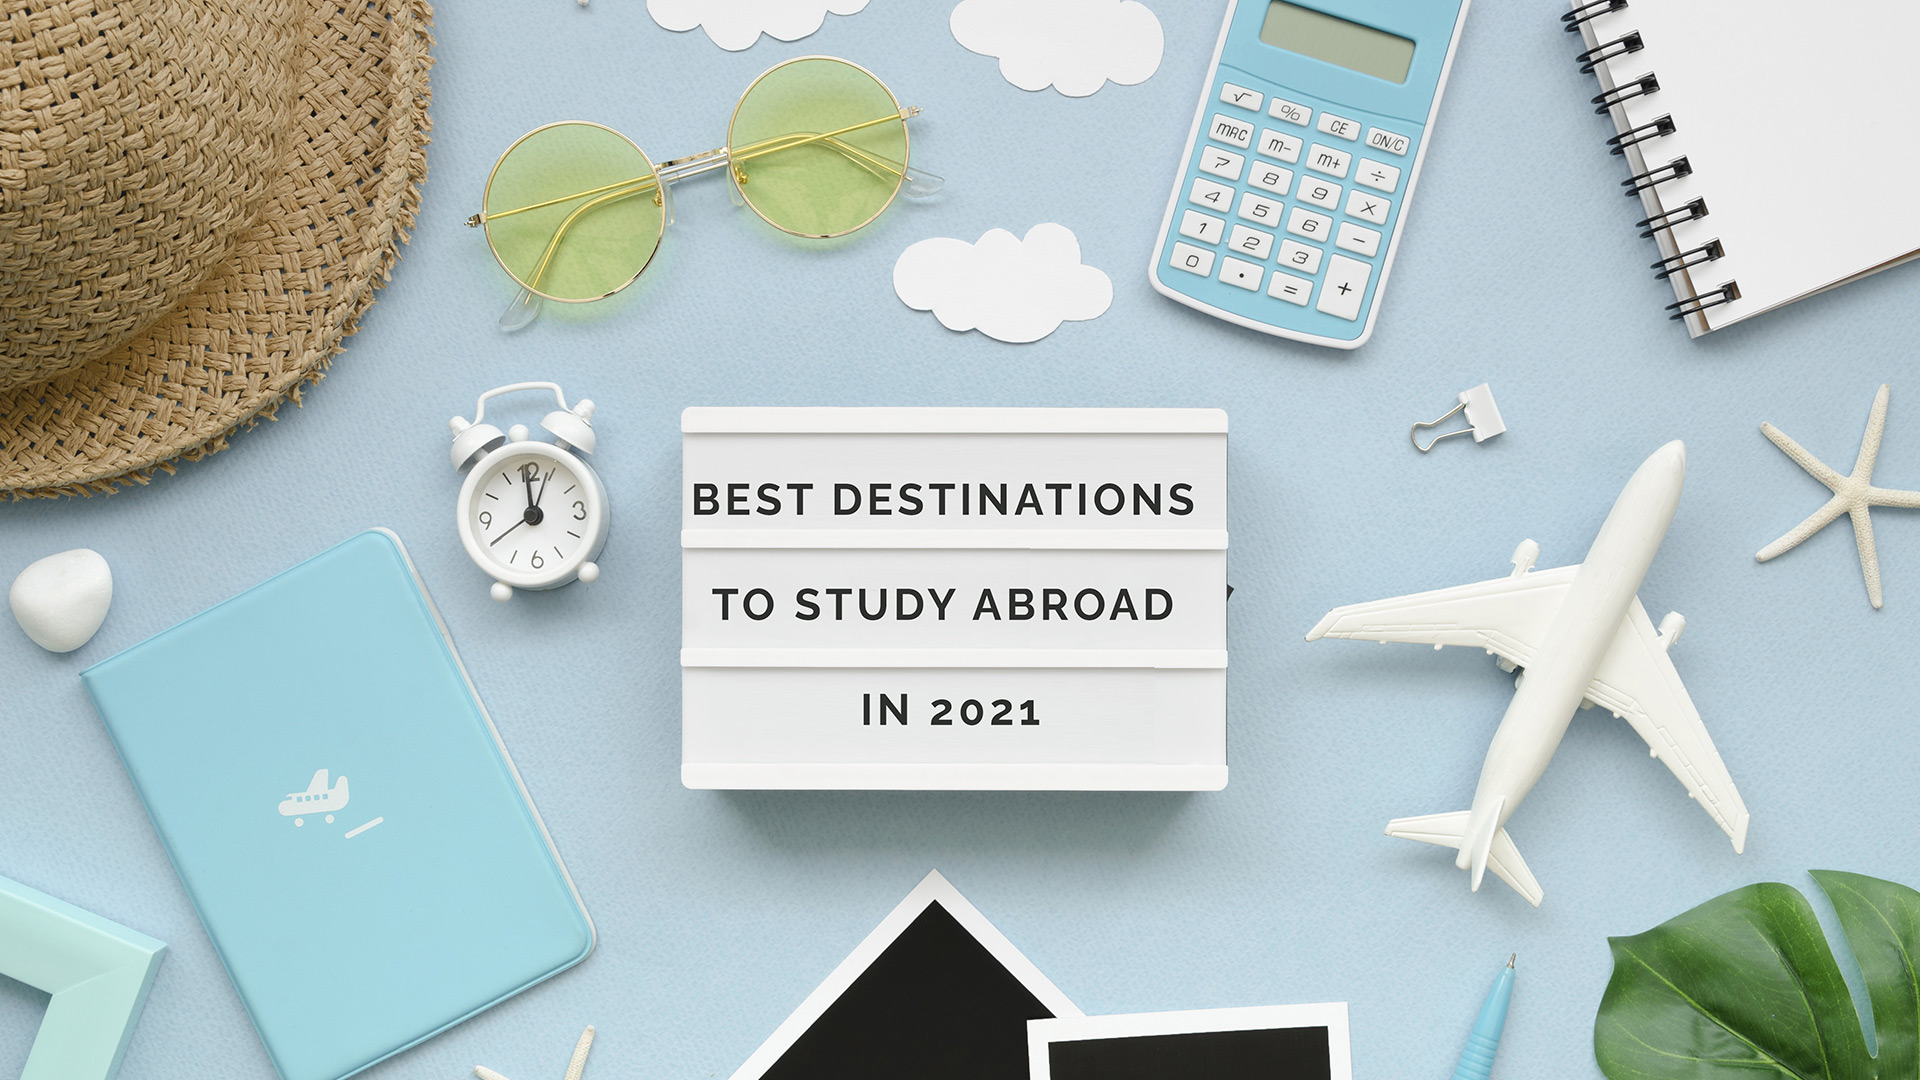 Know about the Best Destinations to Study Abroad in 2021